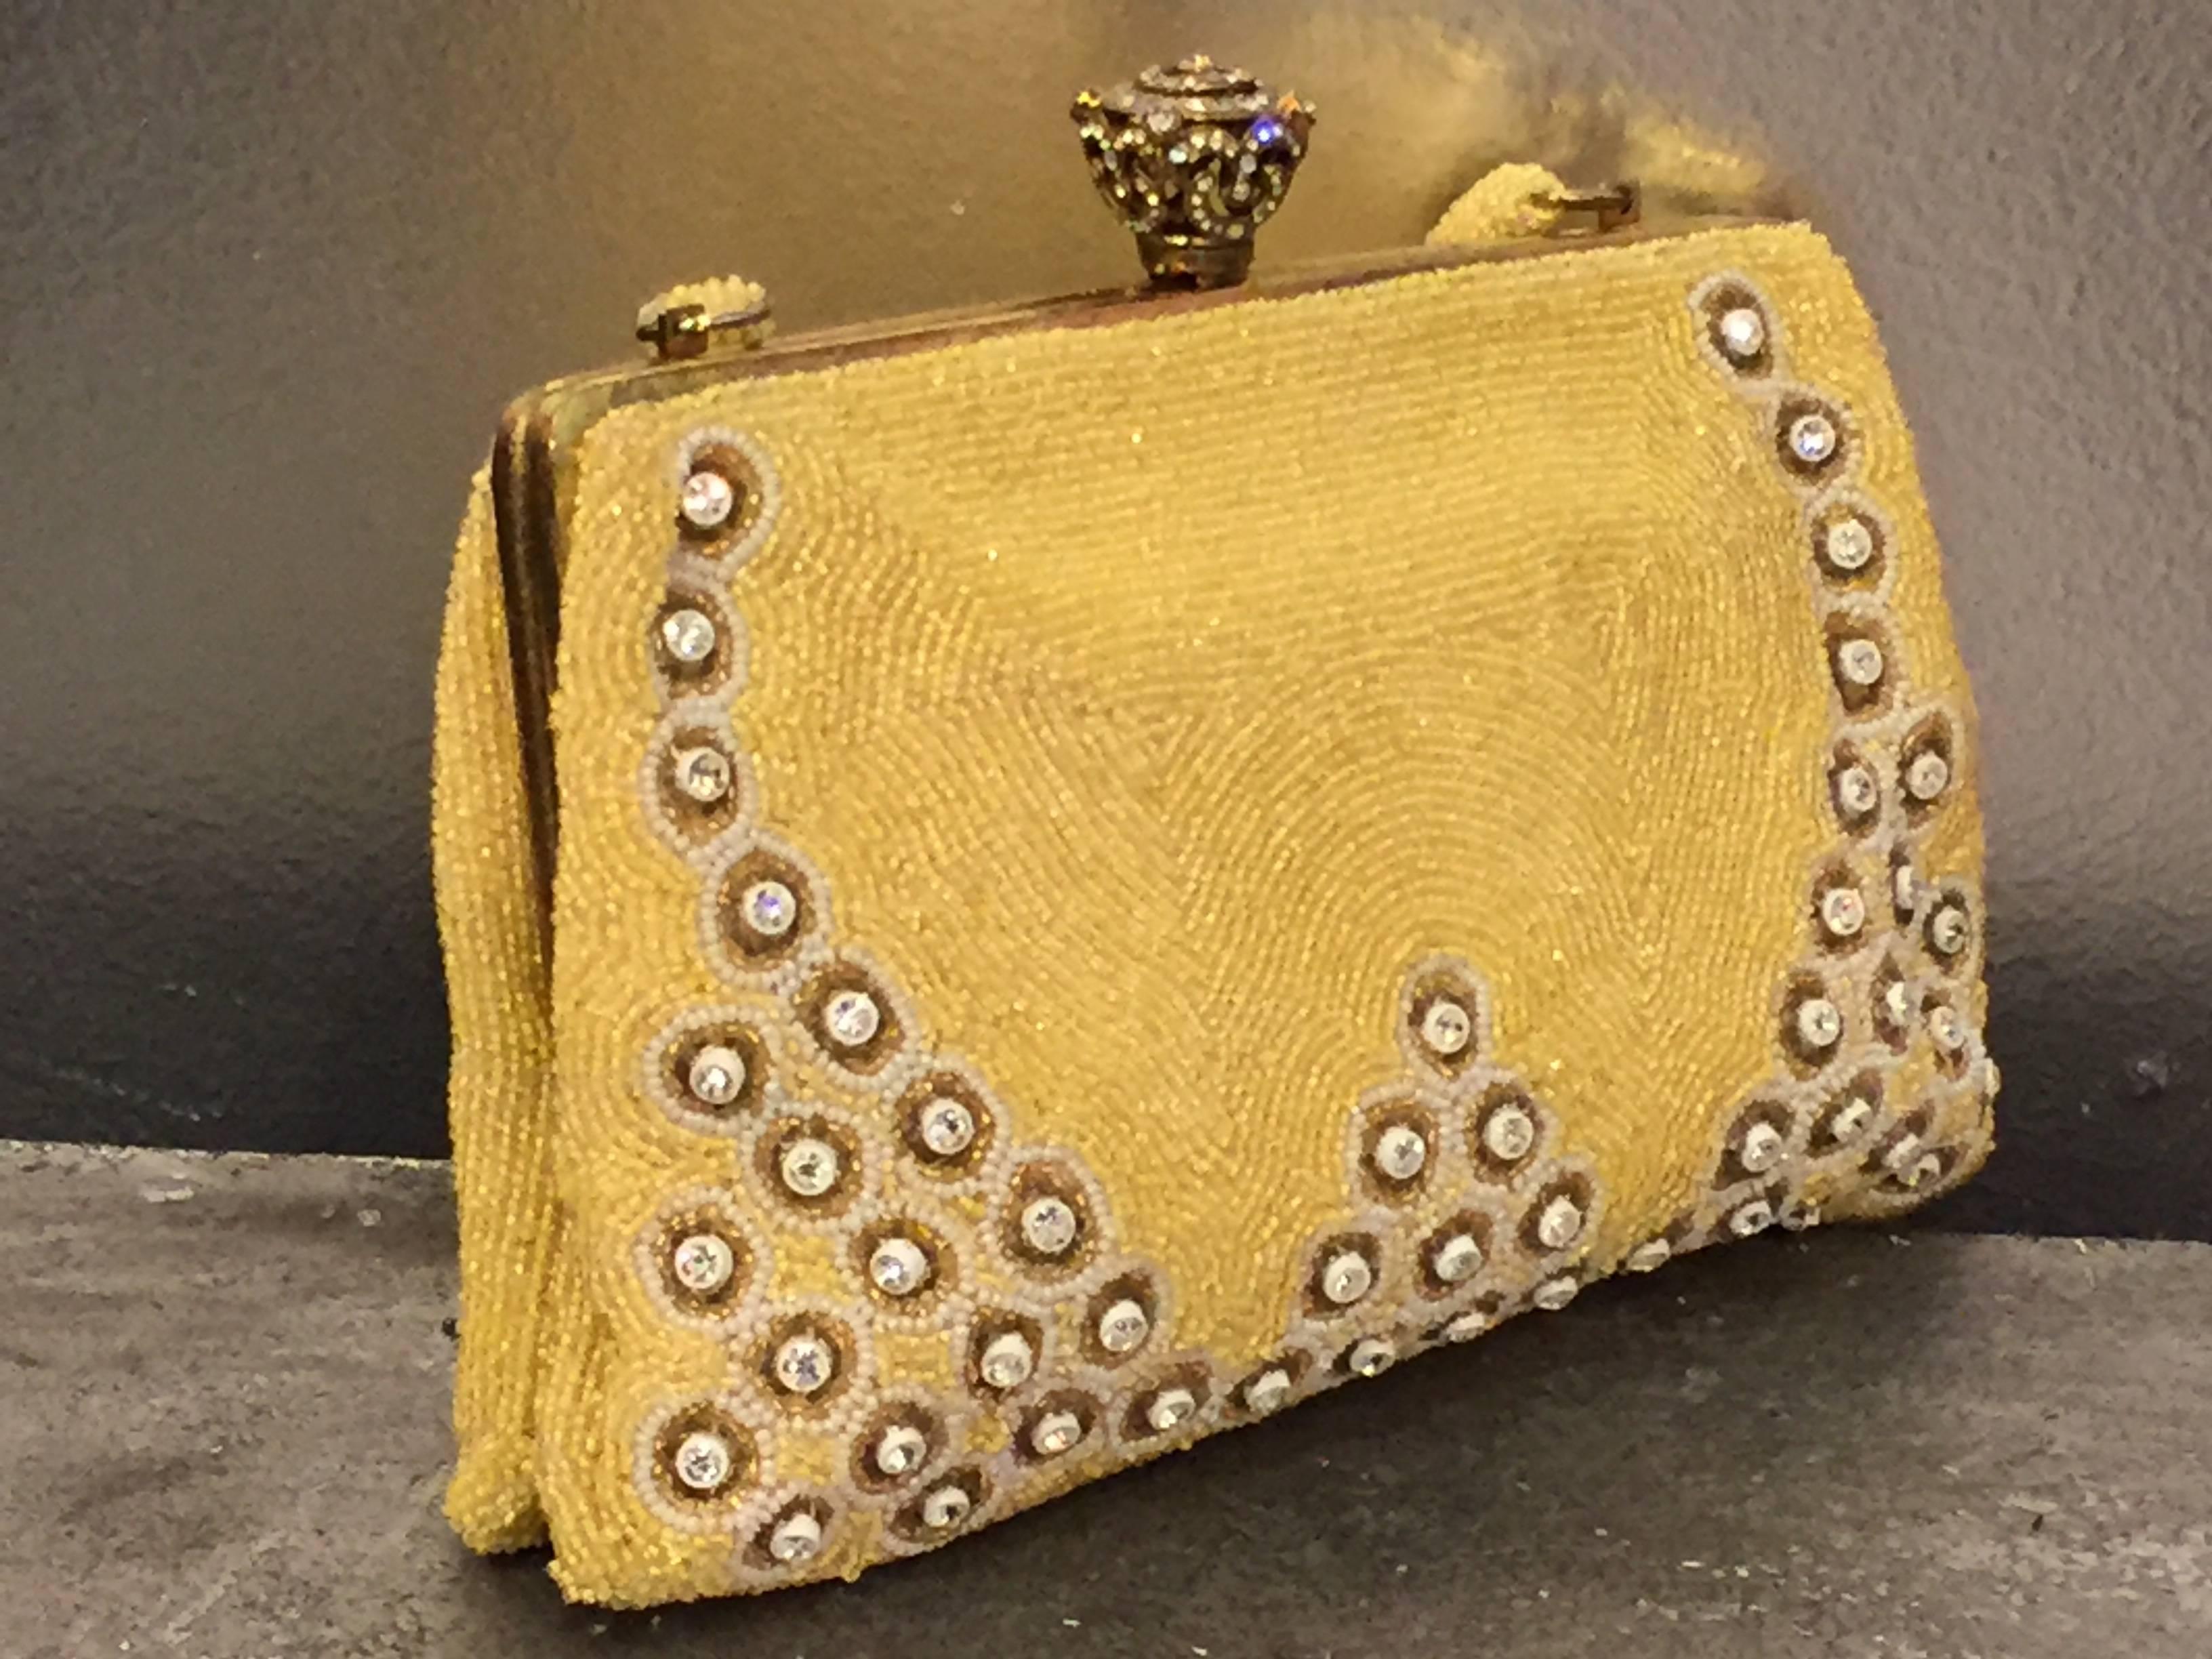 A divine 1950s Belgium-made buttercup yellow beaded and stoned handbag with a fabulous large 